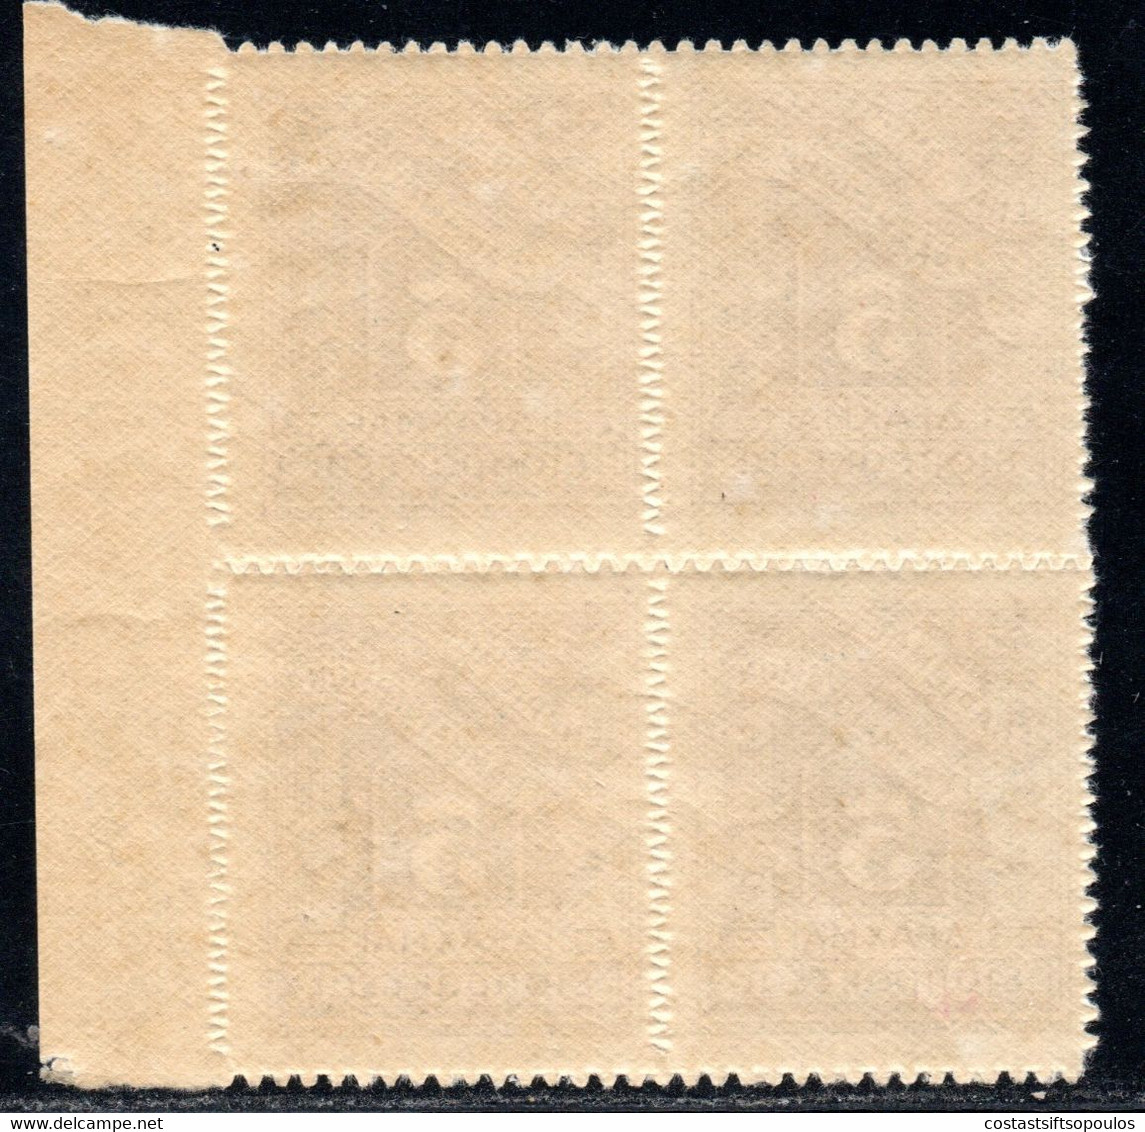 1395. GREECE.1913-1928 POSTAGE DUE. 5 DR. MNH BLOCK OF 4  VERY FINE AND FRESH. - Ongebruikt